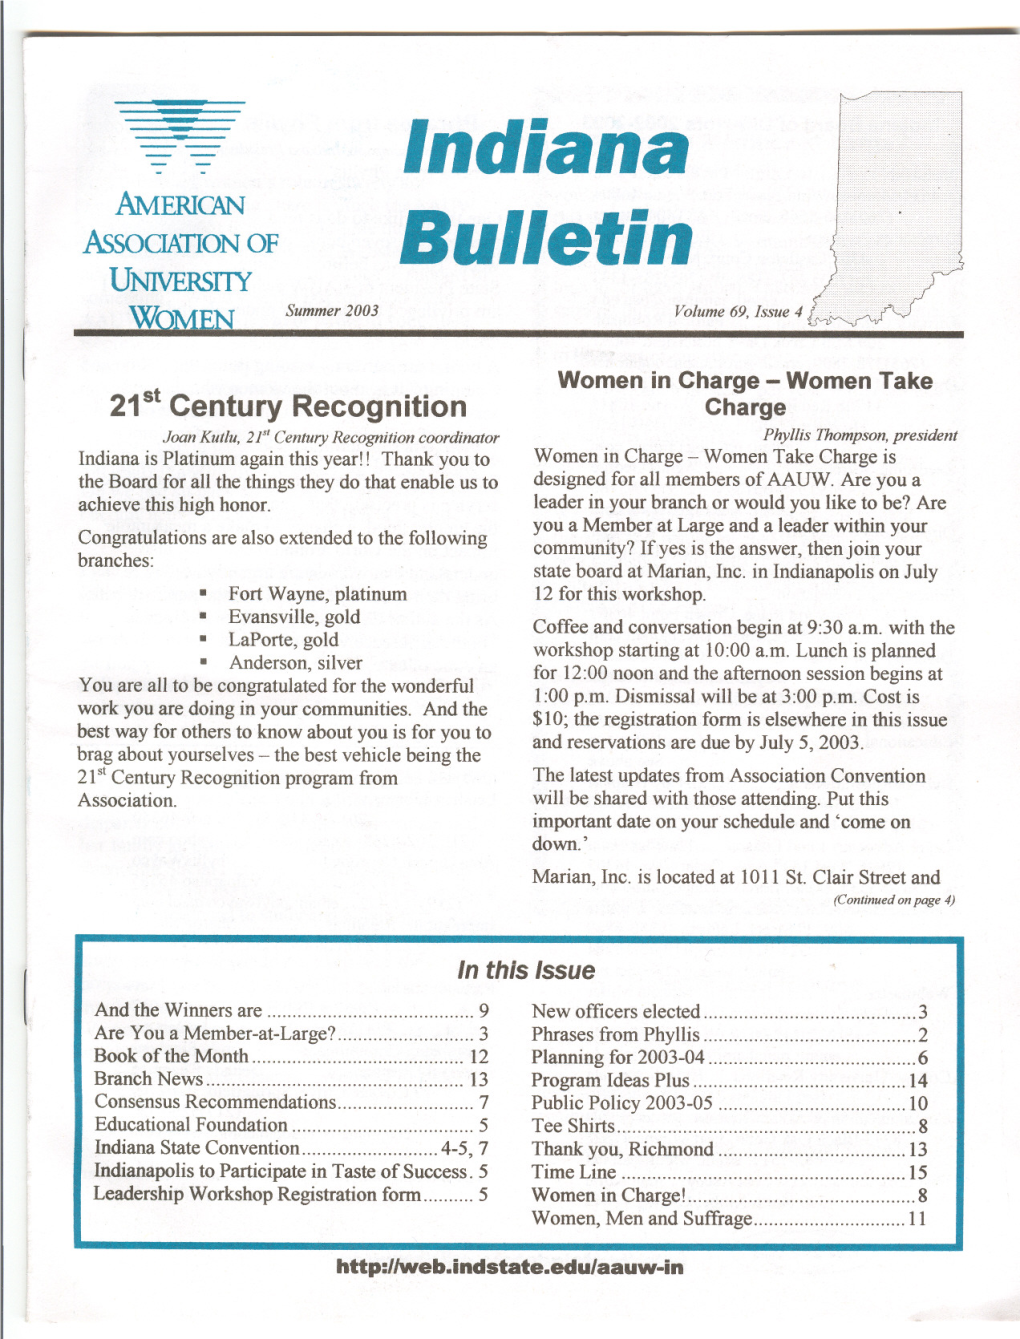 Indiana Bulletin Is Published Four Times Each Year 320 North Kibby, Clinton 47842 for Members of Indiana AAUW